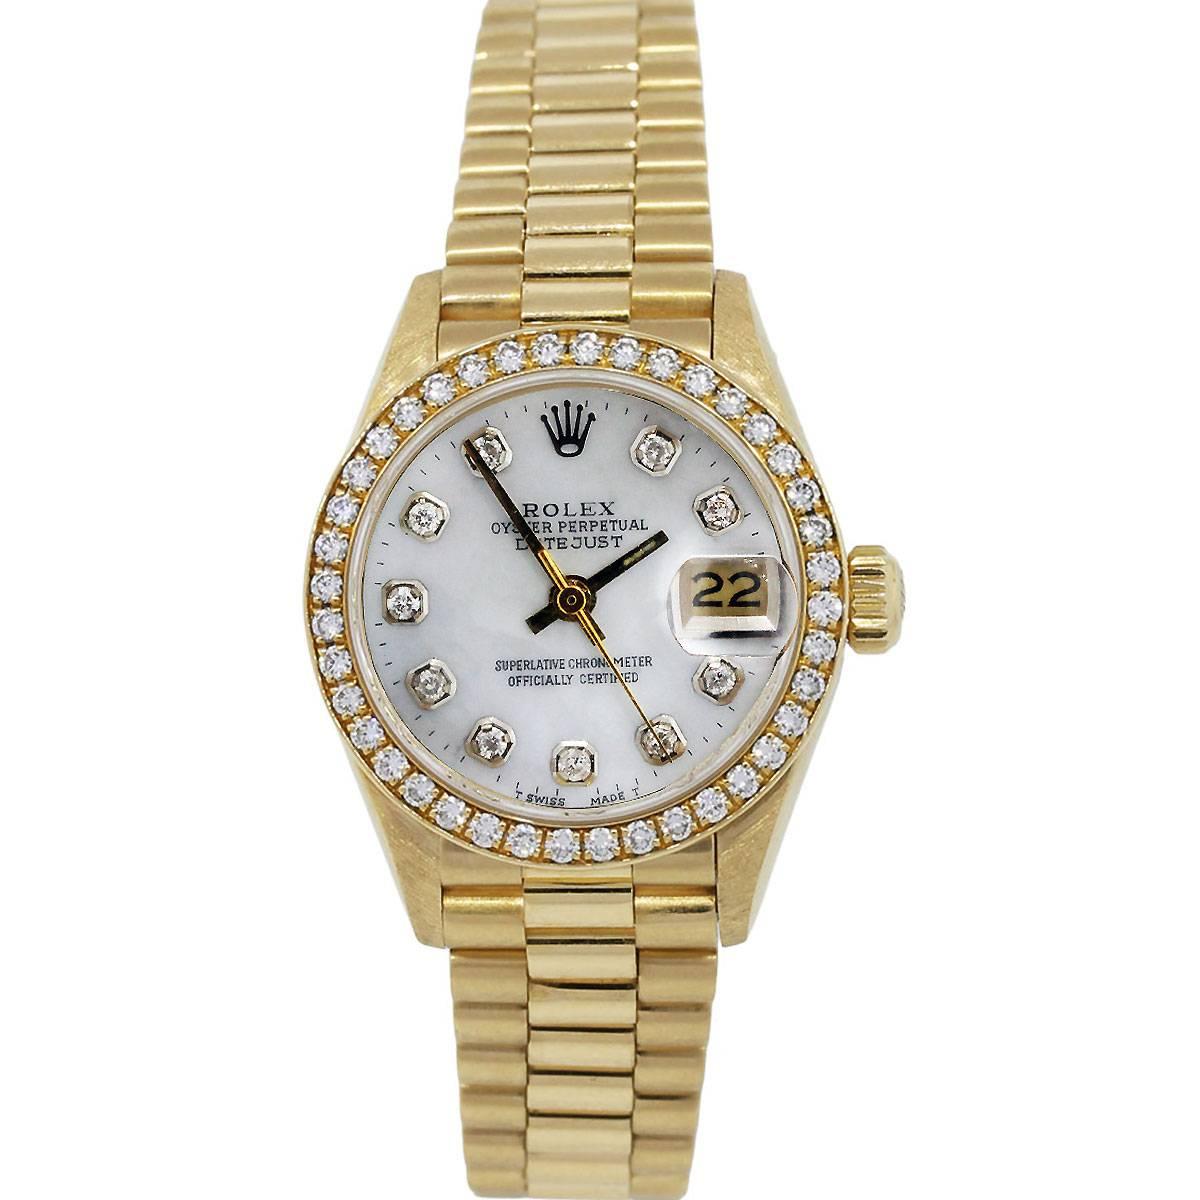 Brand: Rolex
Model: Datejust 6917
Case Material: 18k Yellow Gold
Dial: Mother of Pearl Dial with Aftermarket Diamond Markers
Bezel: Aftermarket Diamond Bezel, Diamonds are G in color and VS in clarity
Case Measurements: 26mm
Serial: 8